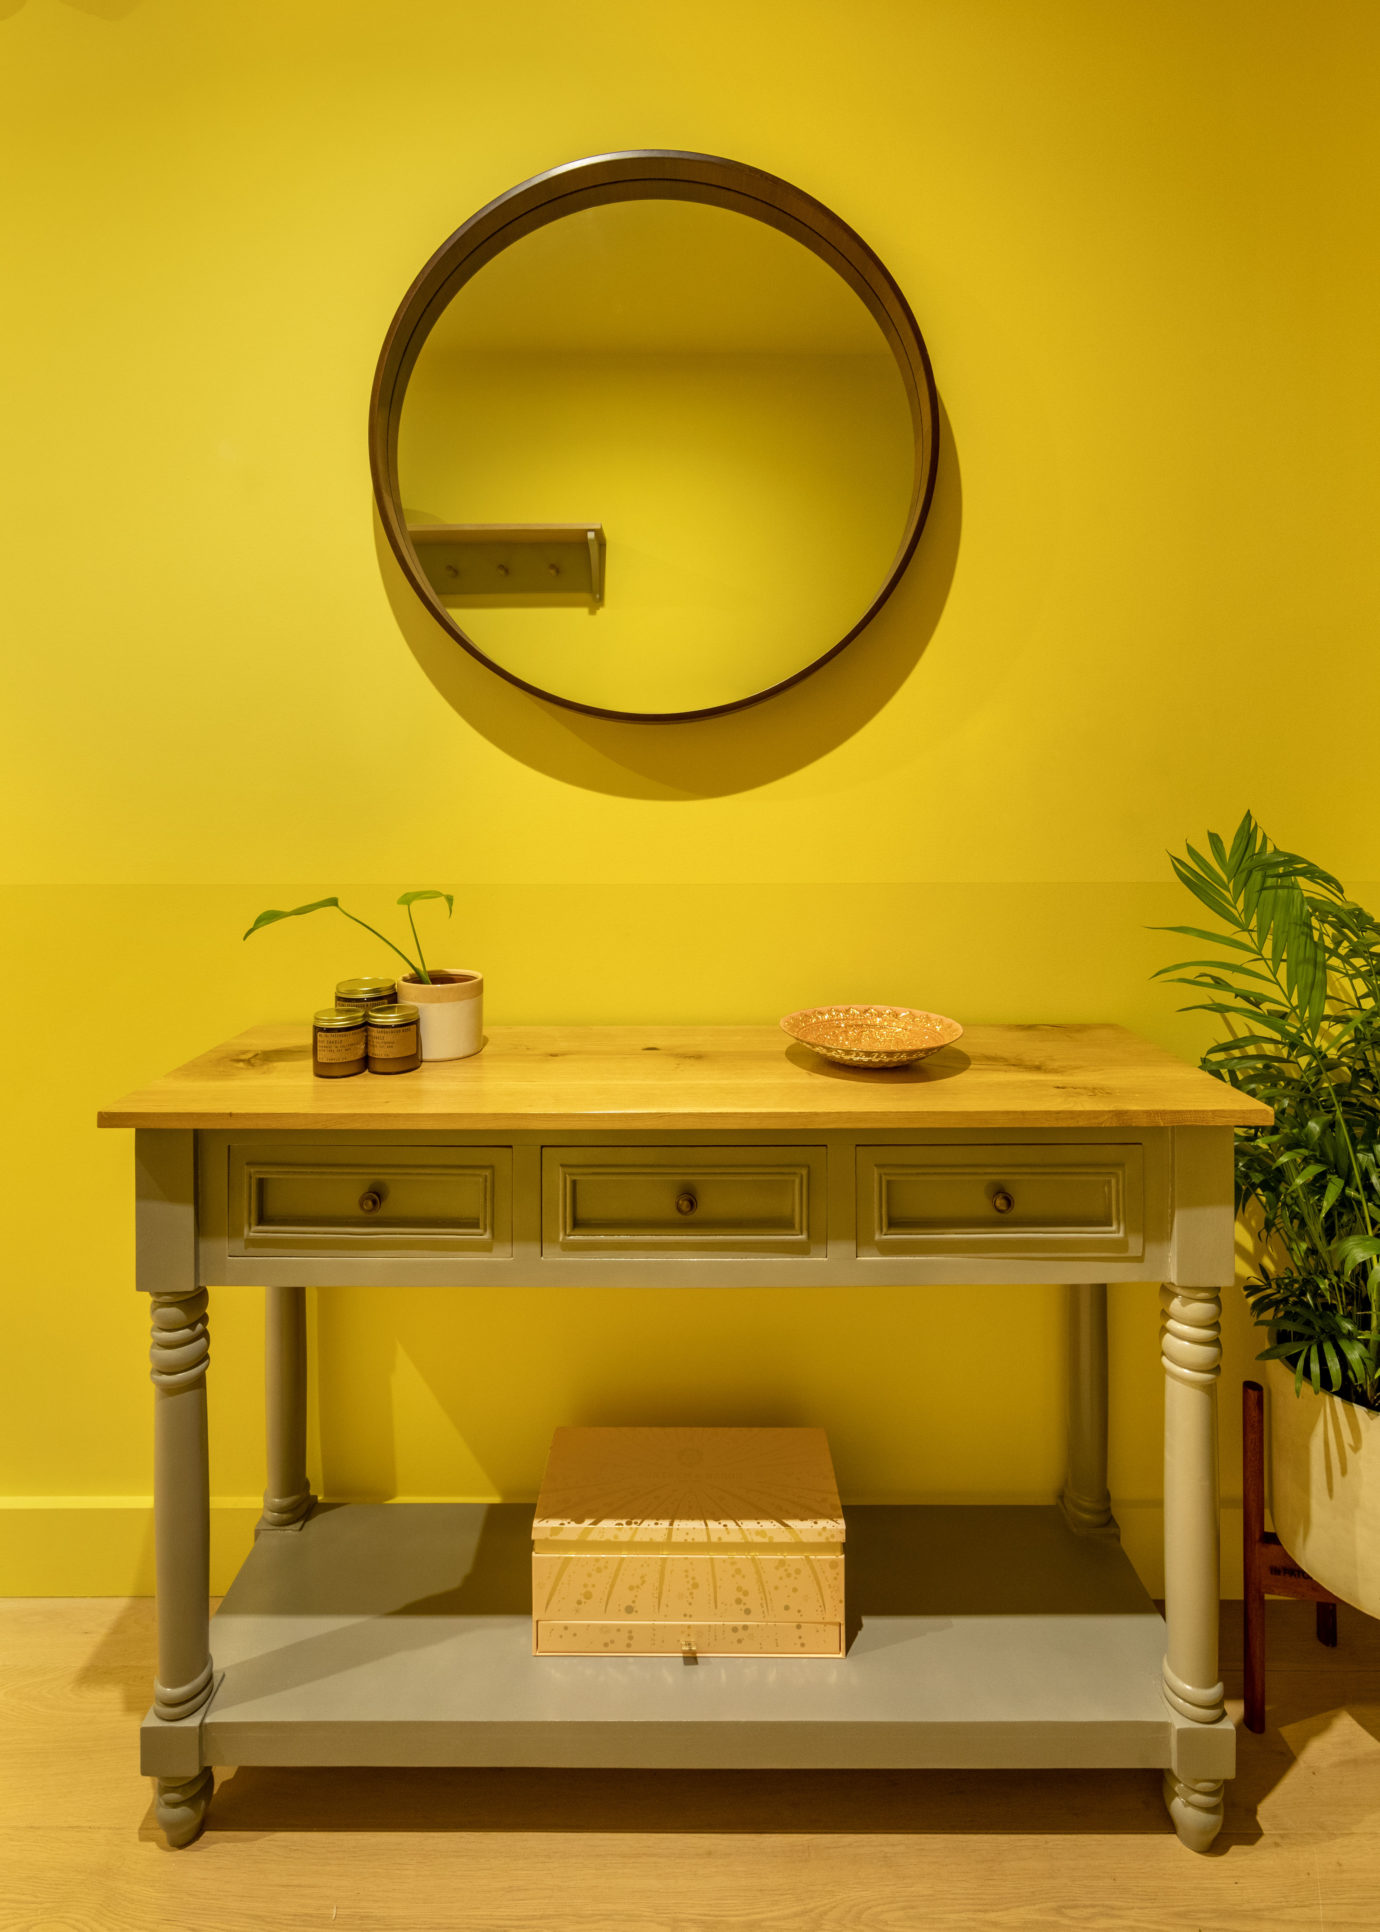 East London apartment interior design table and round mirror against a bright yellow wall